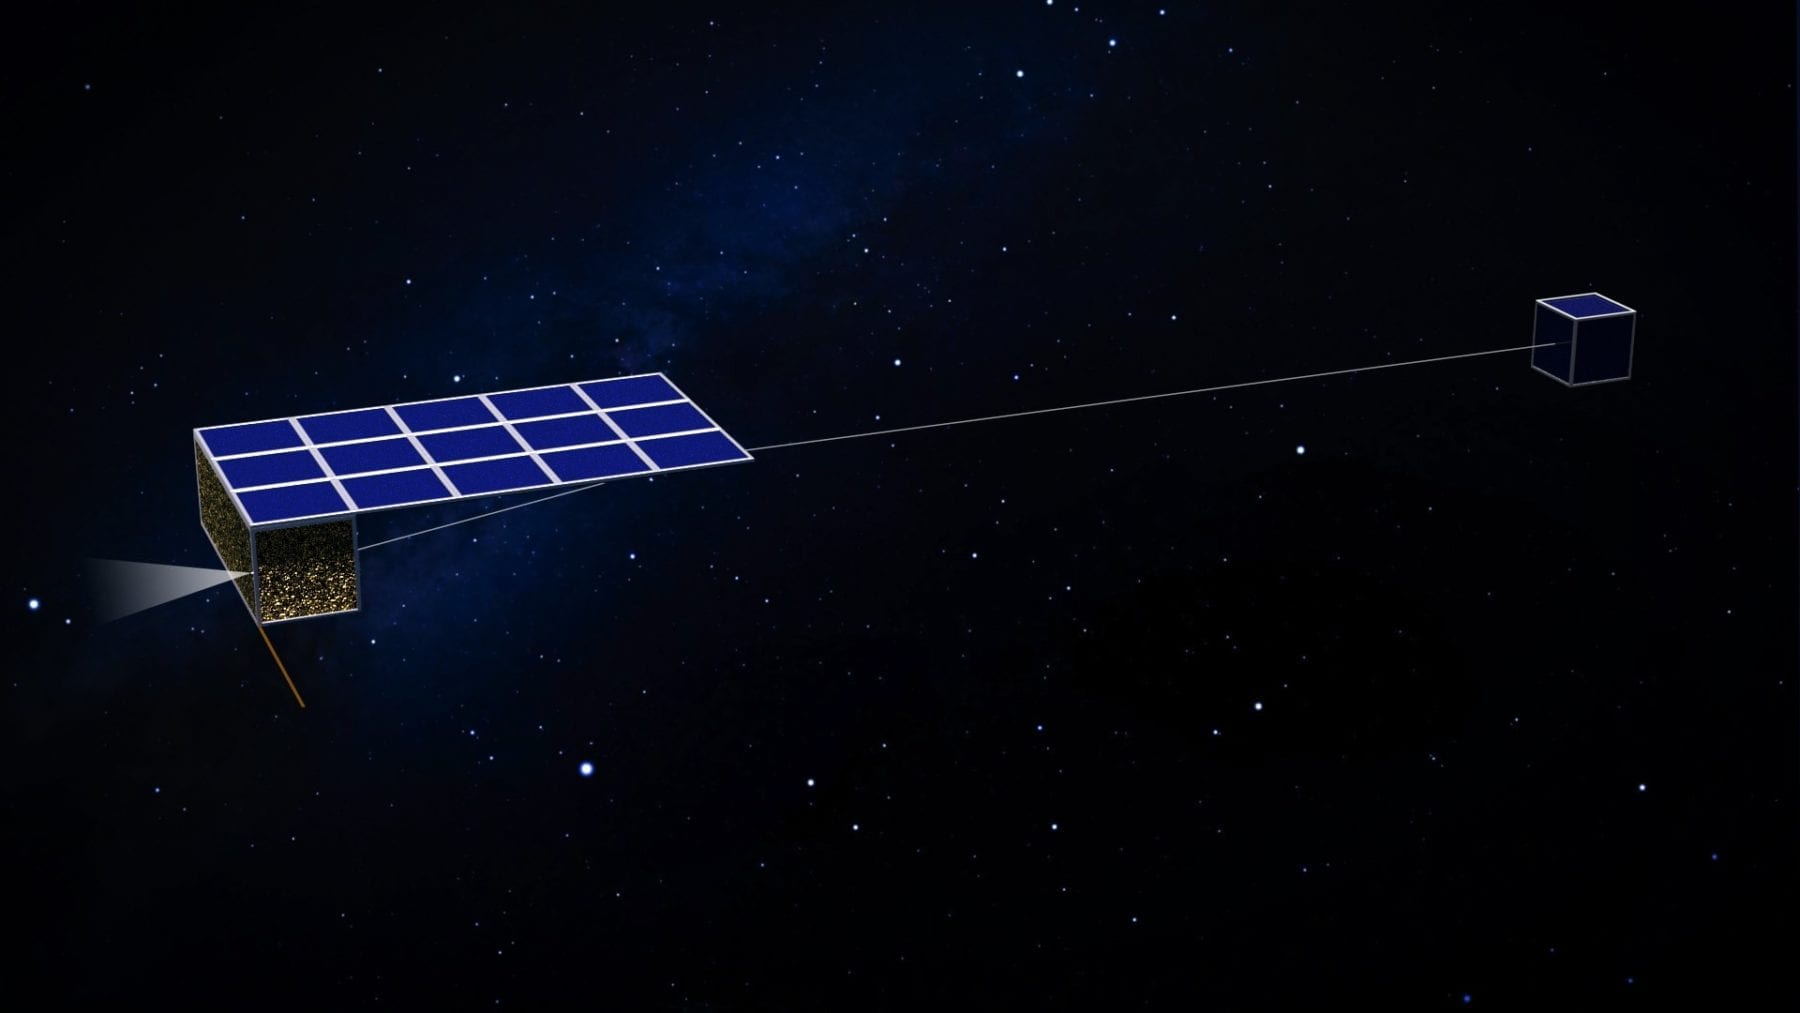 Asteroid Touring Nanosat Fleet could visit 300 asteroids in 3 years